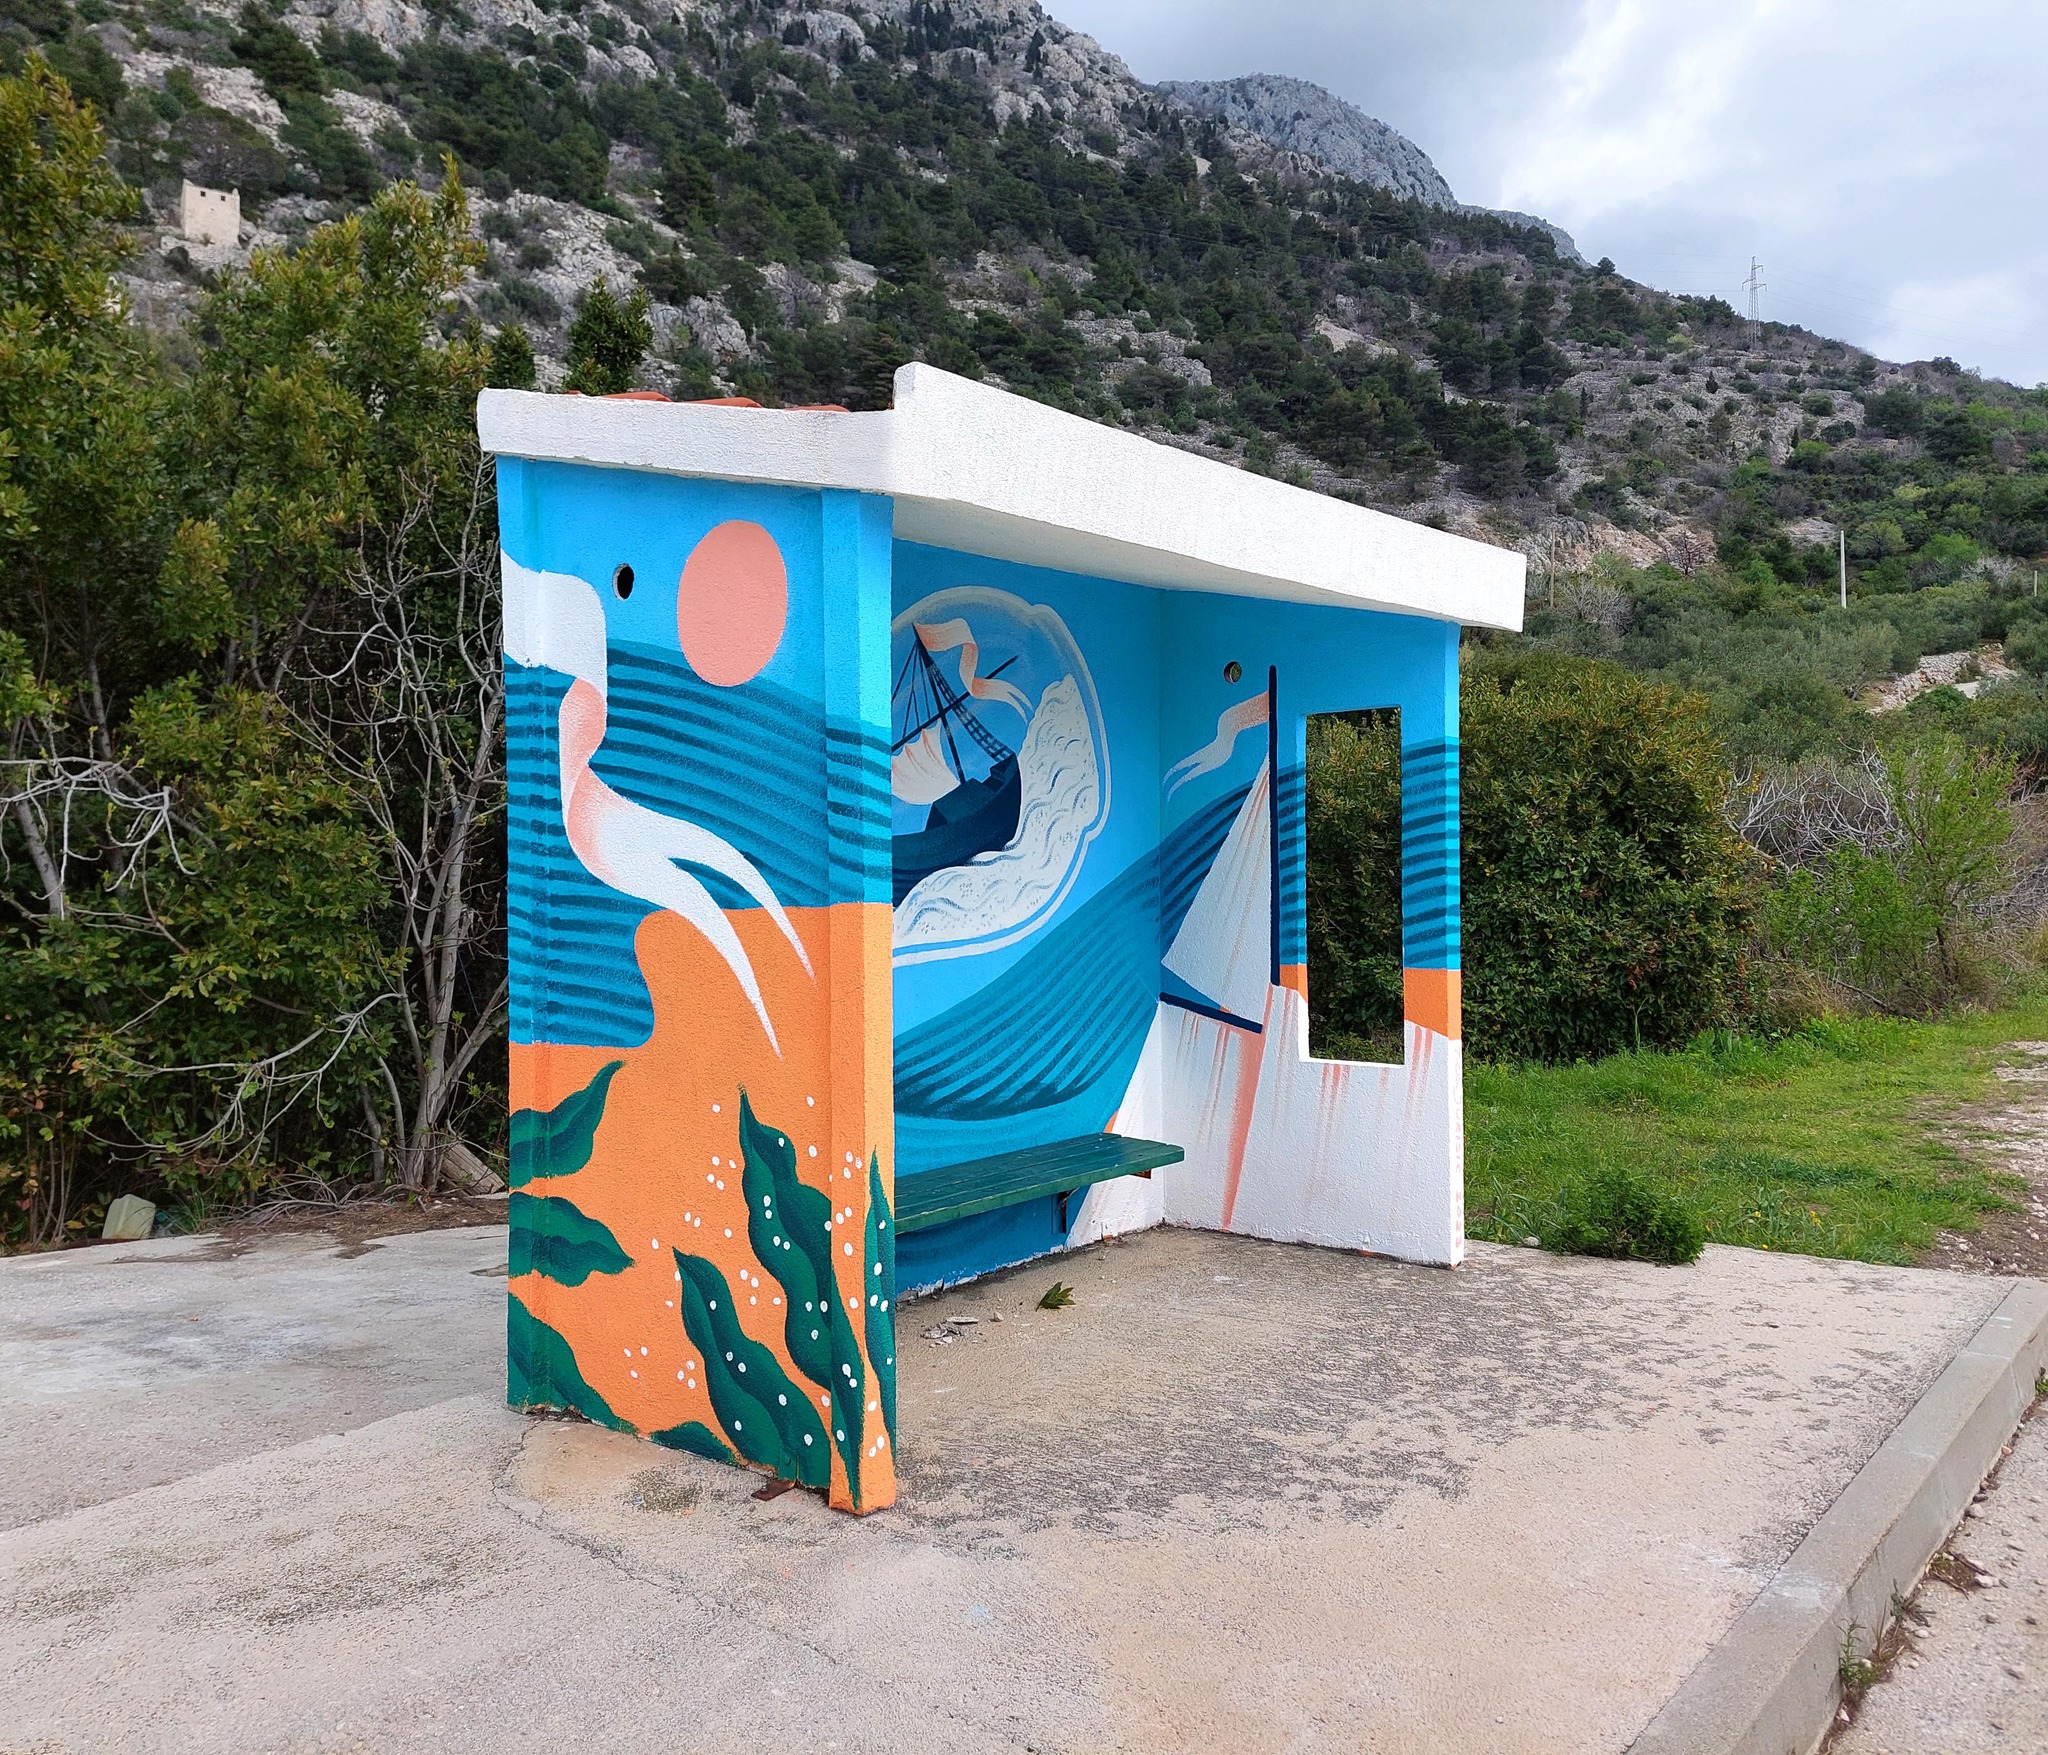 The most charming bus stops in Croatia: Tea adds charm to waiting